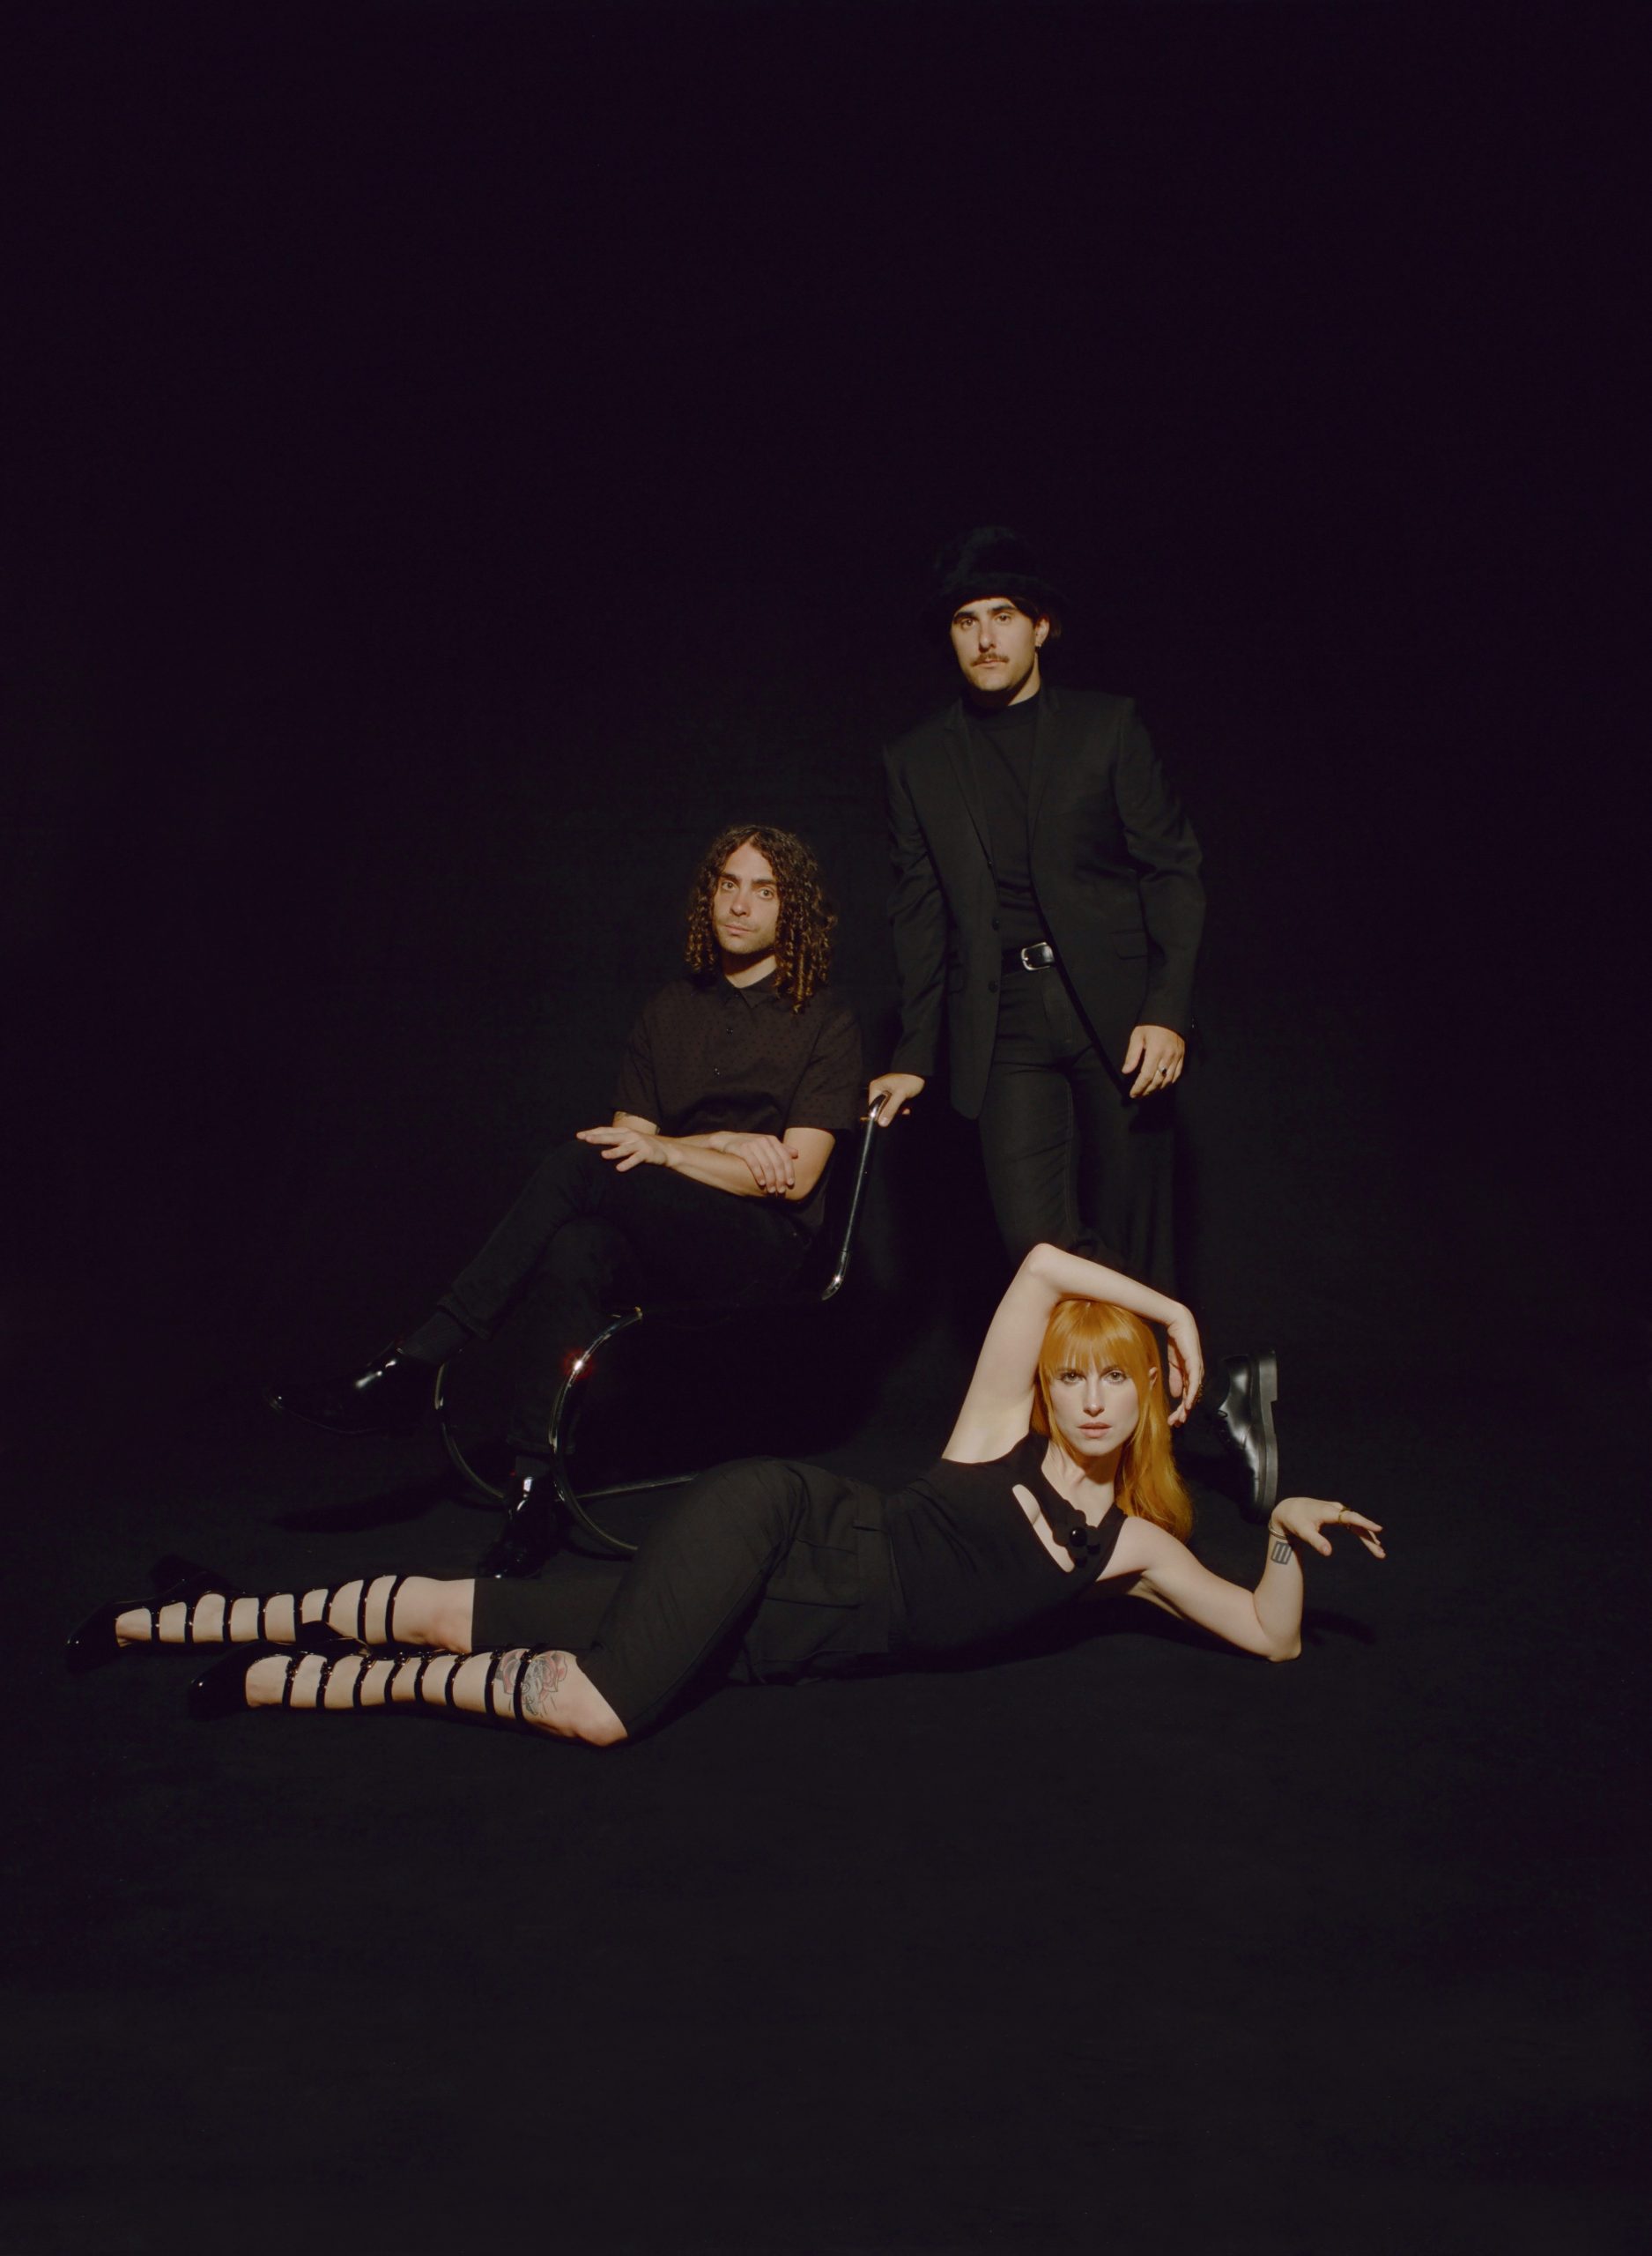 Paramore tribute song lyrics (first verse and chorus). Click on